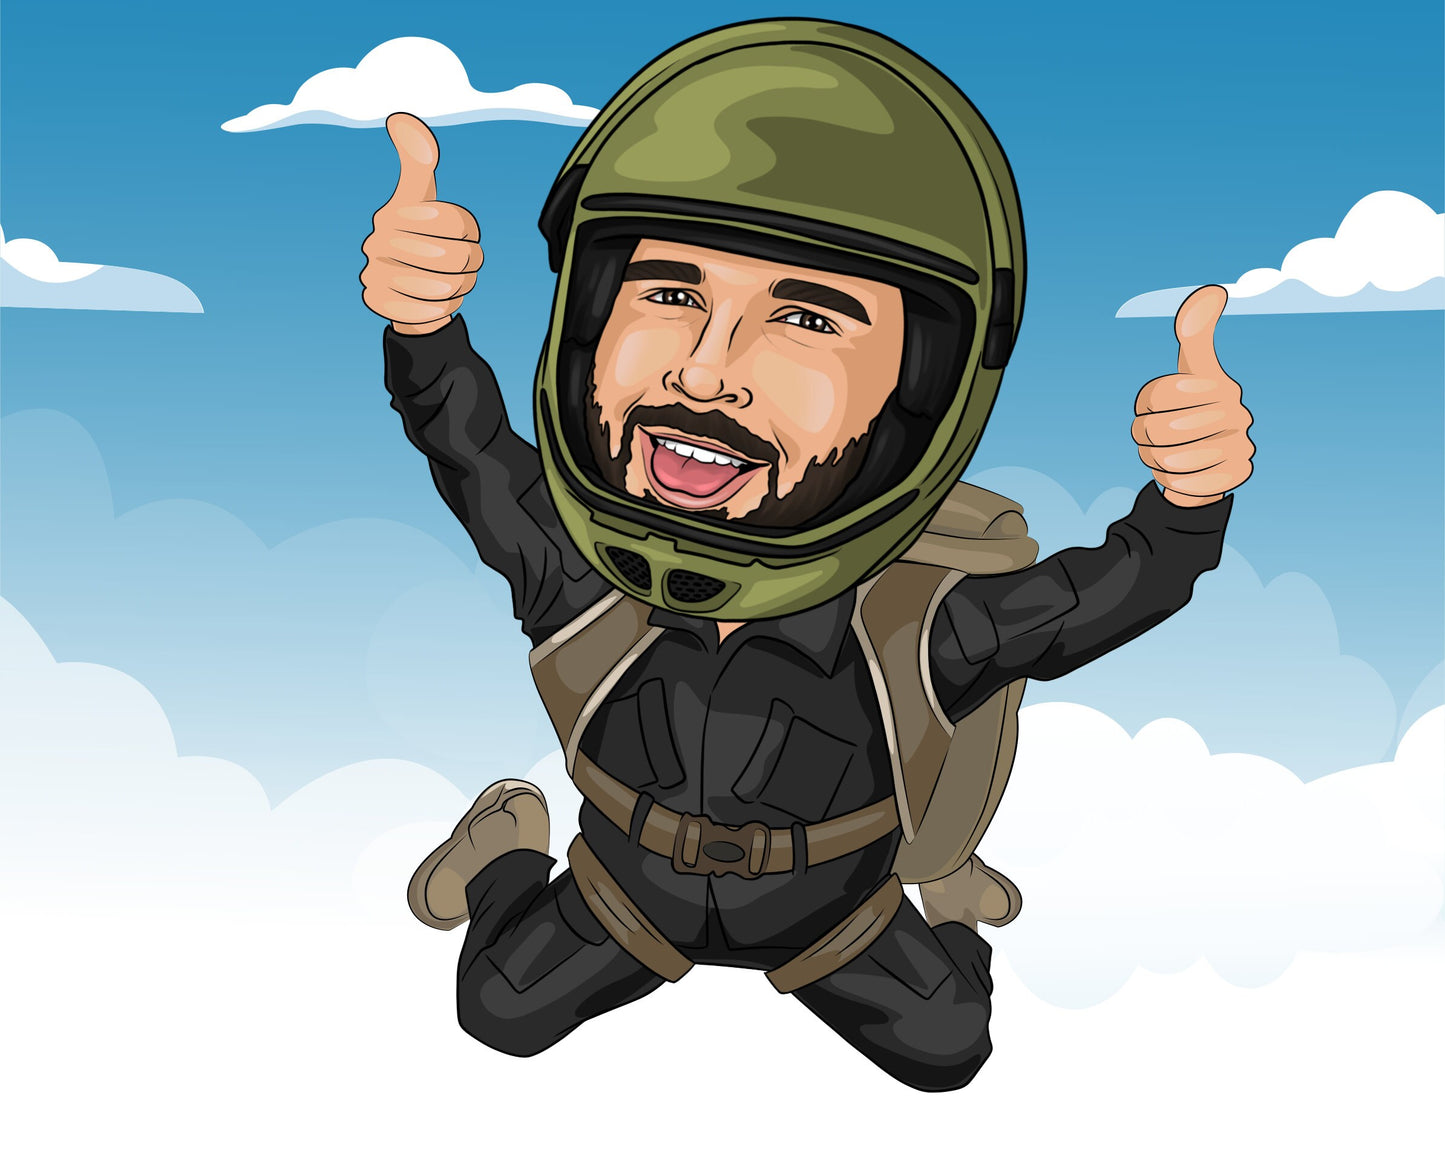 Skydiver Gift - Custom Caricature Portrait From Your Photo/skydiving gift